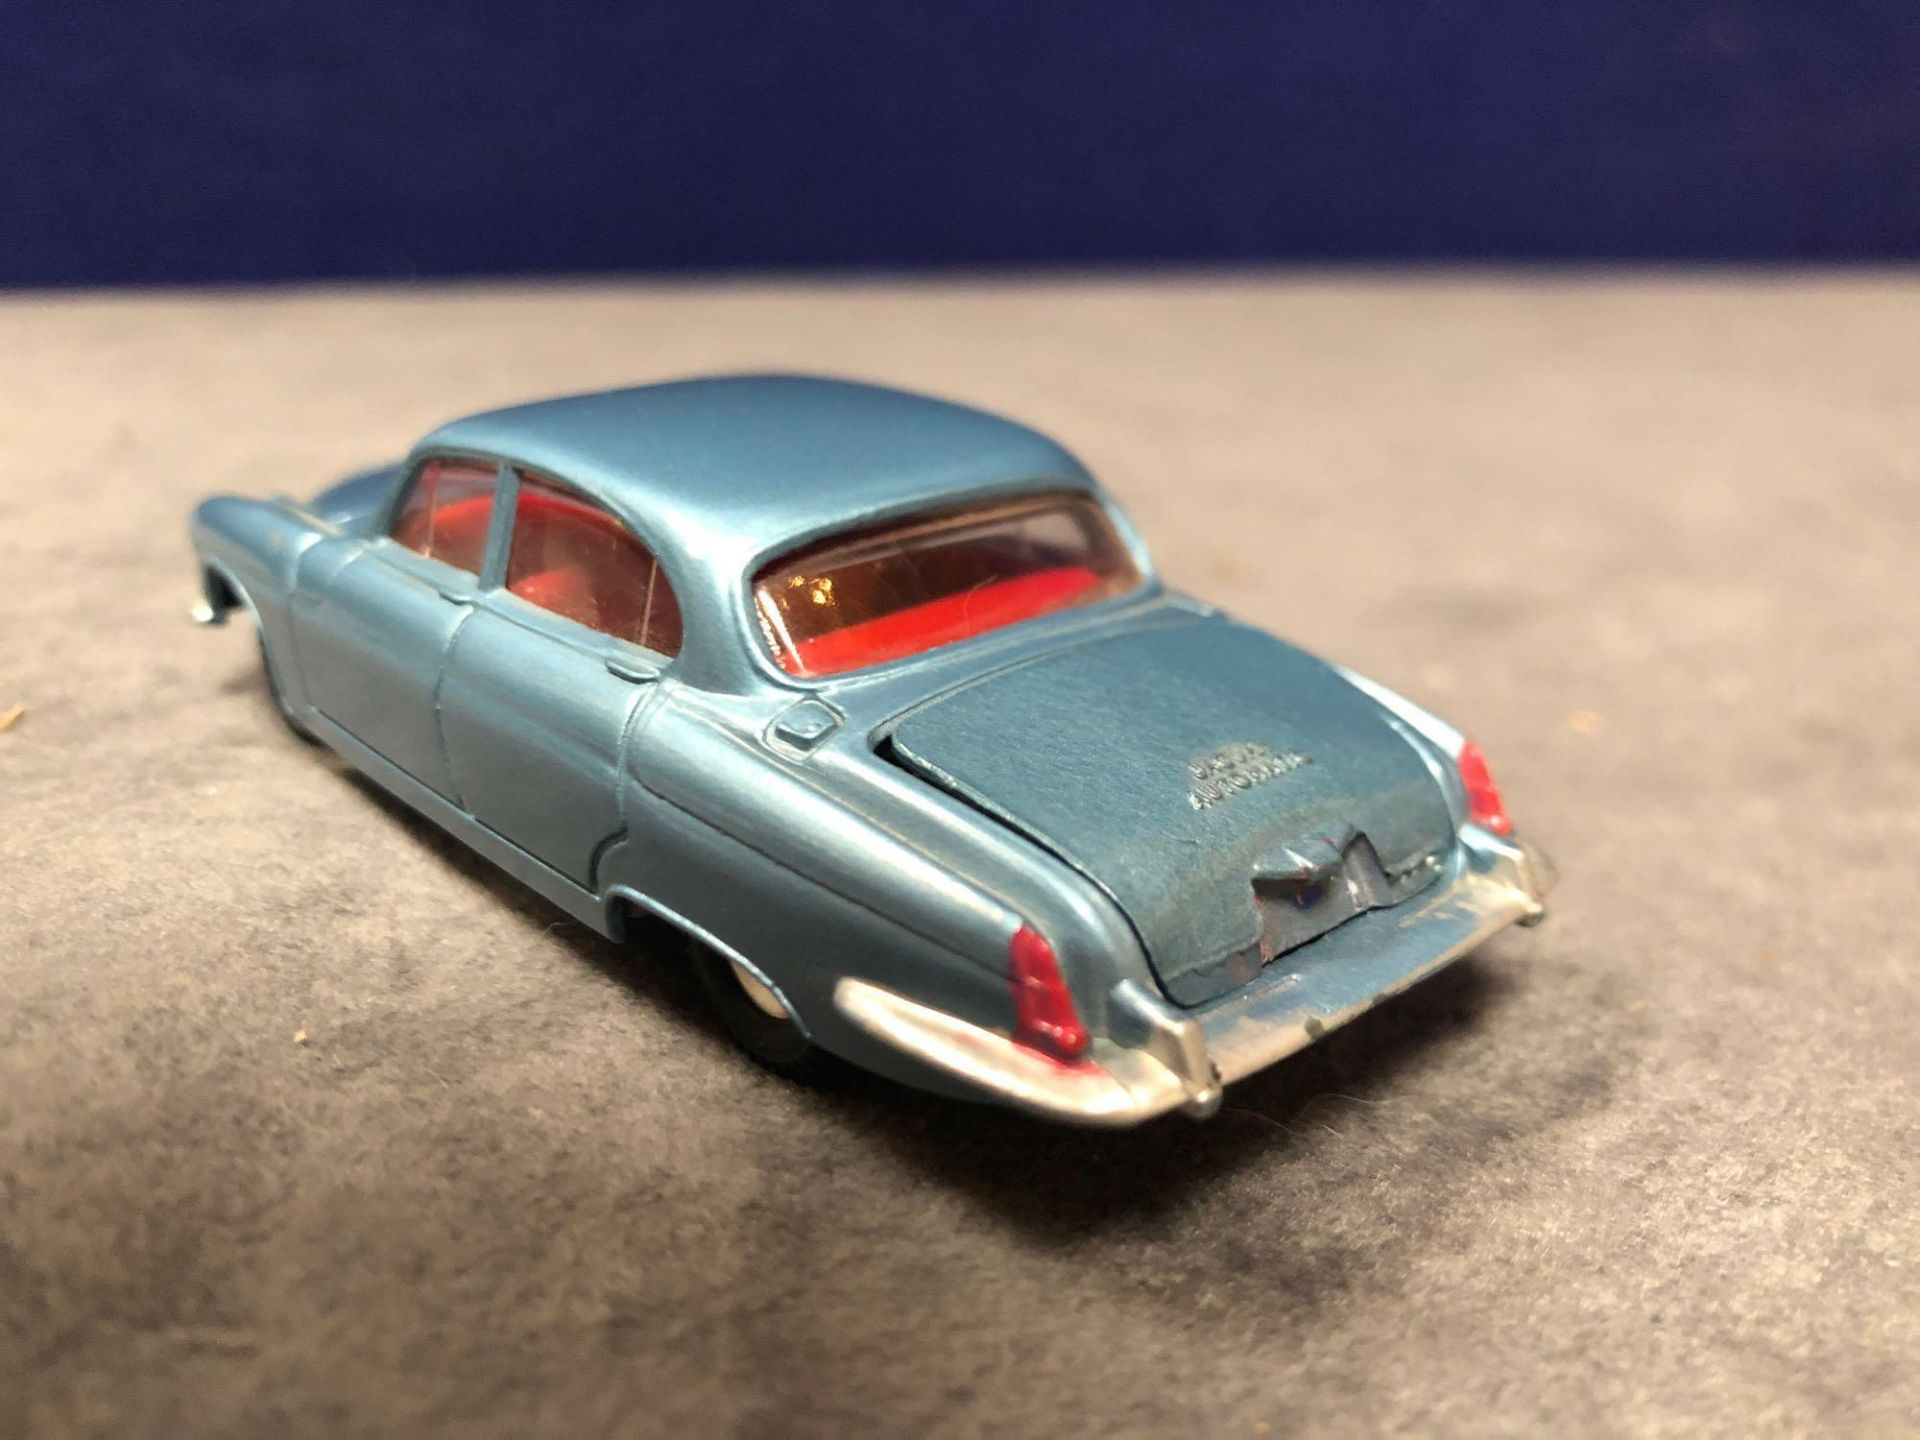 Dinky #142 Jaguar Mark X In Blue With Red Interior 1962-1968 Unboxed Mint Lovely Model - Image 3 of 4